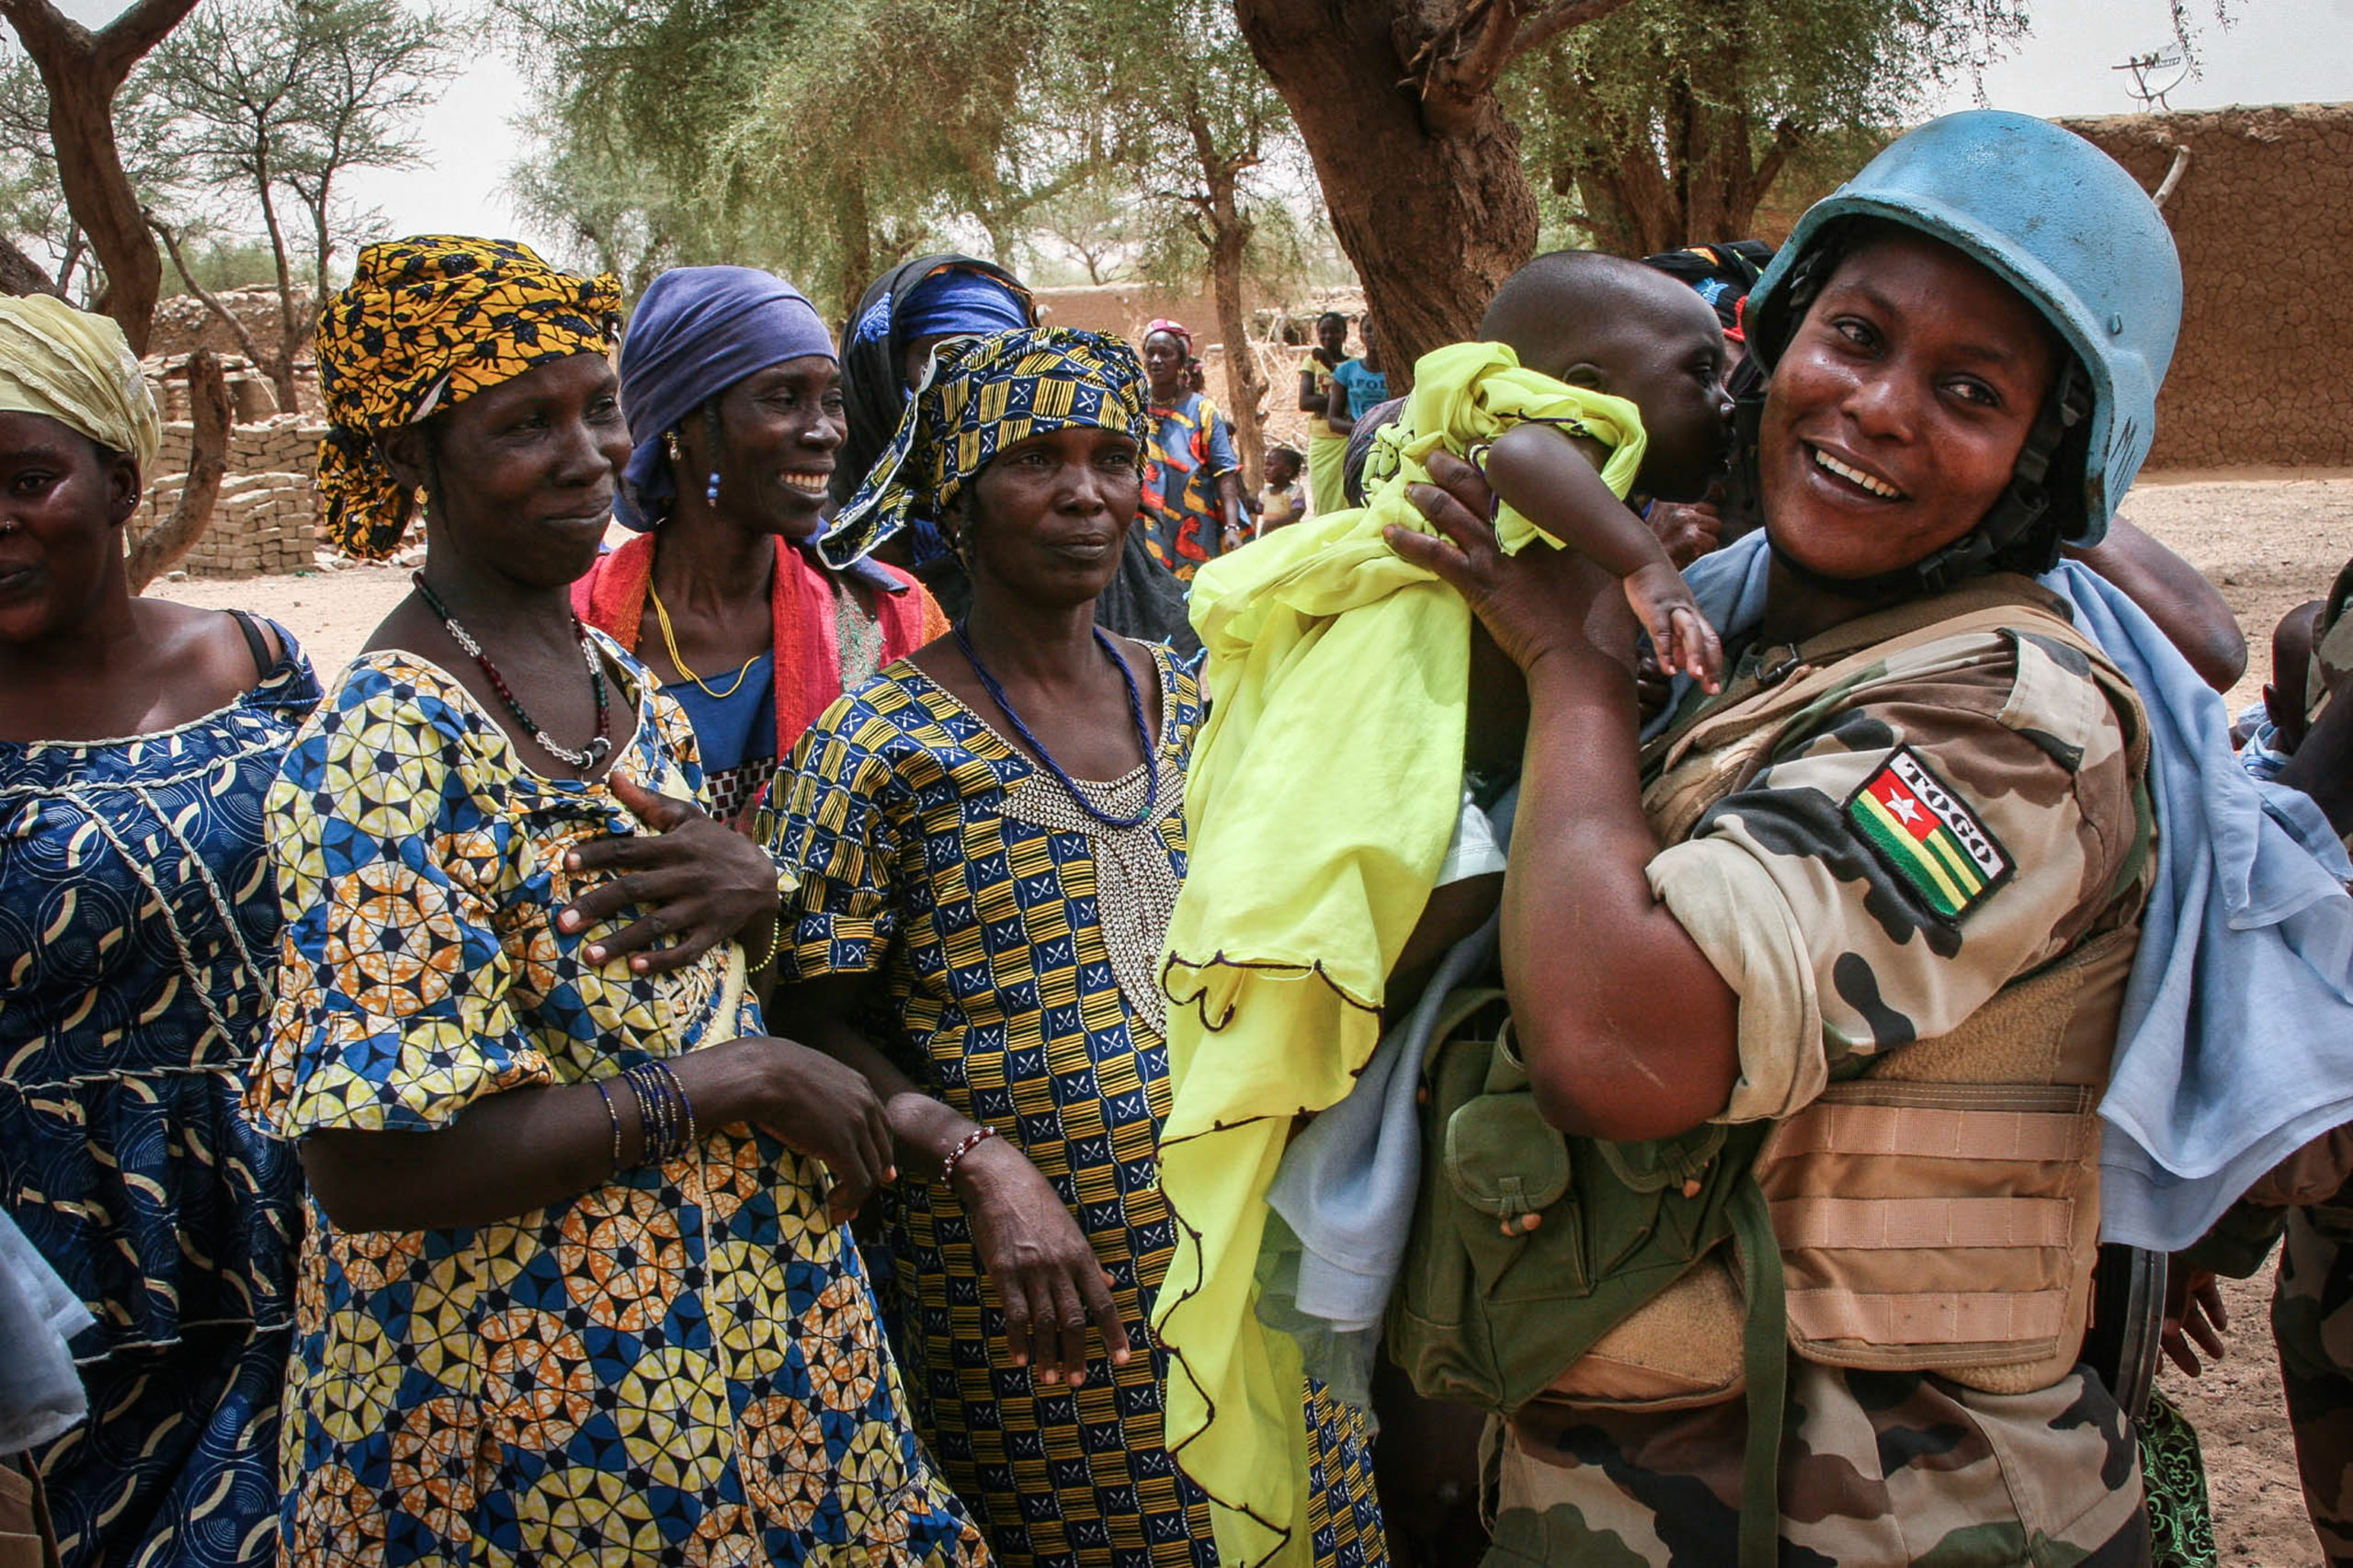 What do a farm in Mali and UN Peacekeeping have in common?